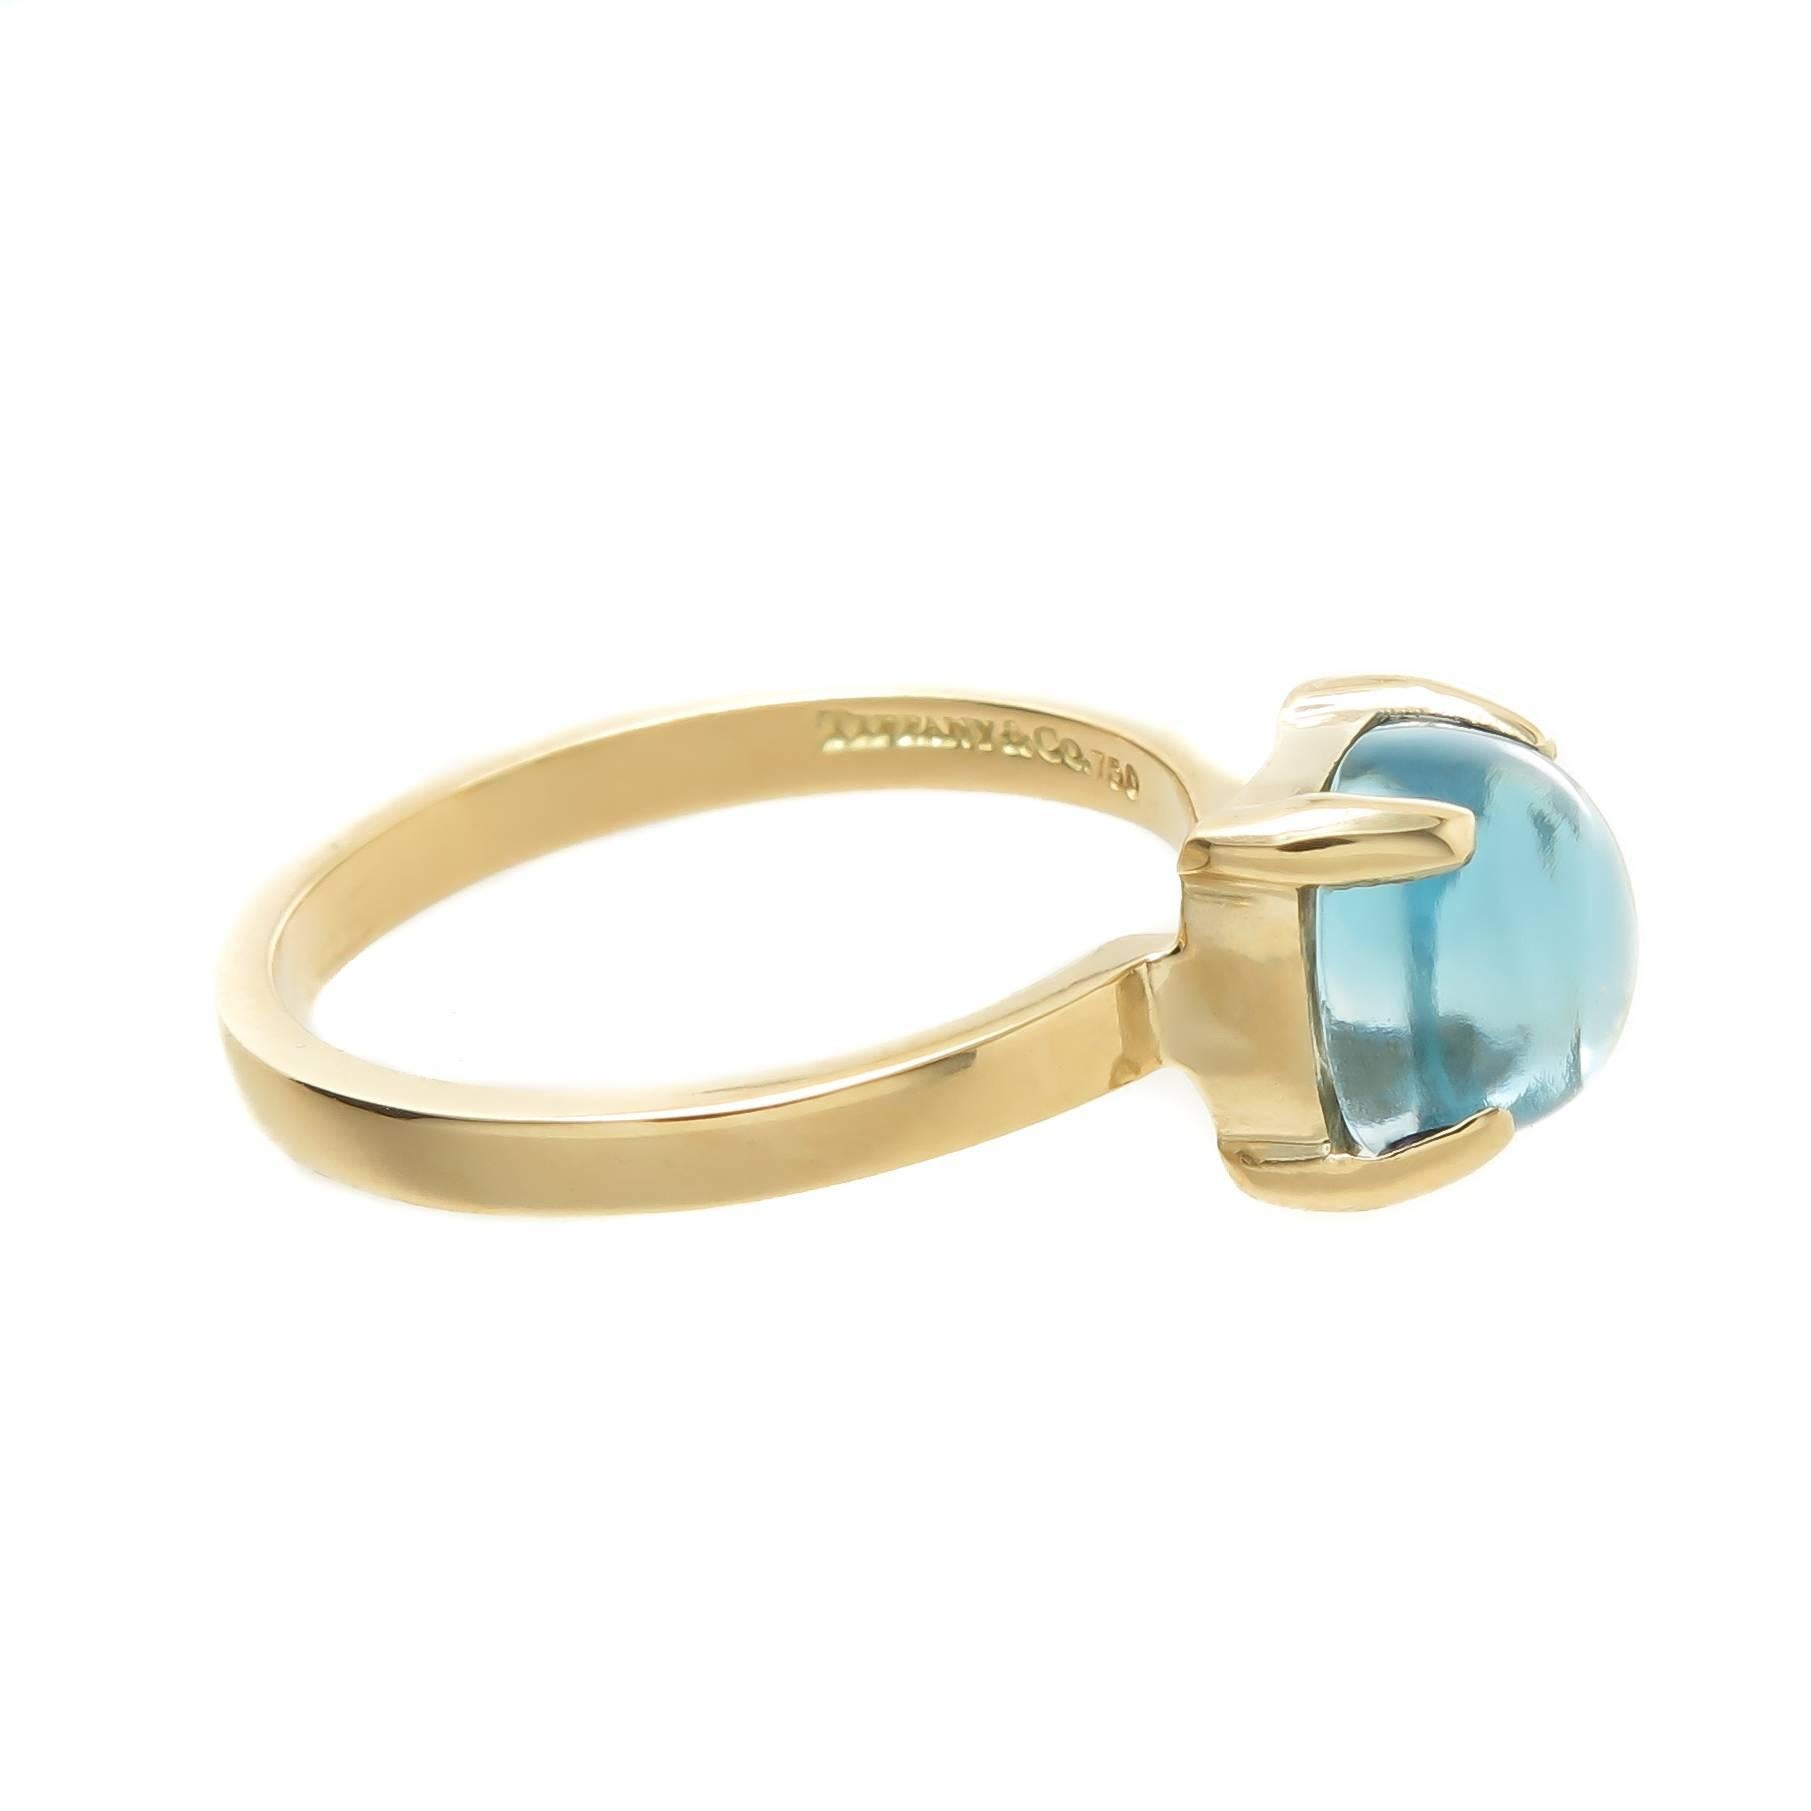 Circa 2015 Paloma Picasso for Tiffany & Company Sugar Stacks Collection 18K Yellow Gold Ring, set with a Fine Blue Sugar loaf Cut Topaz. Finger Size 6. Comes in Tiffany Suede pouch. 